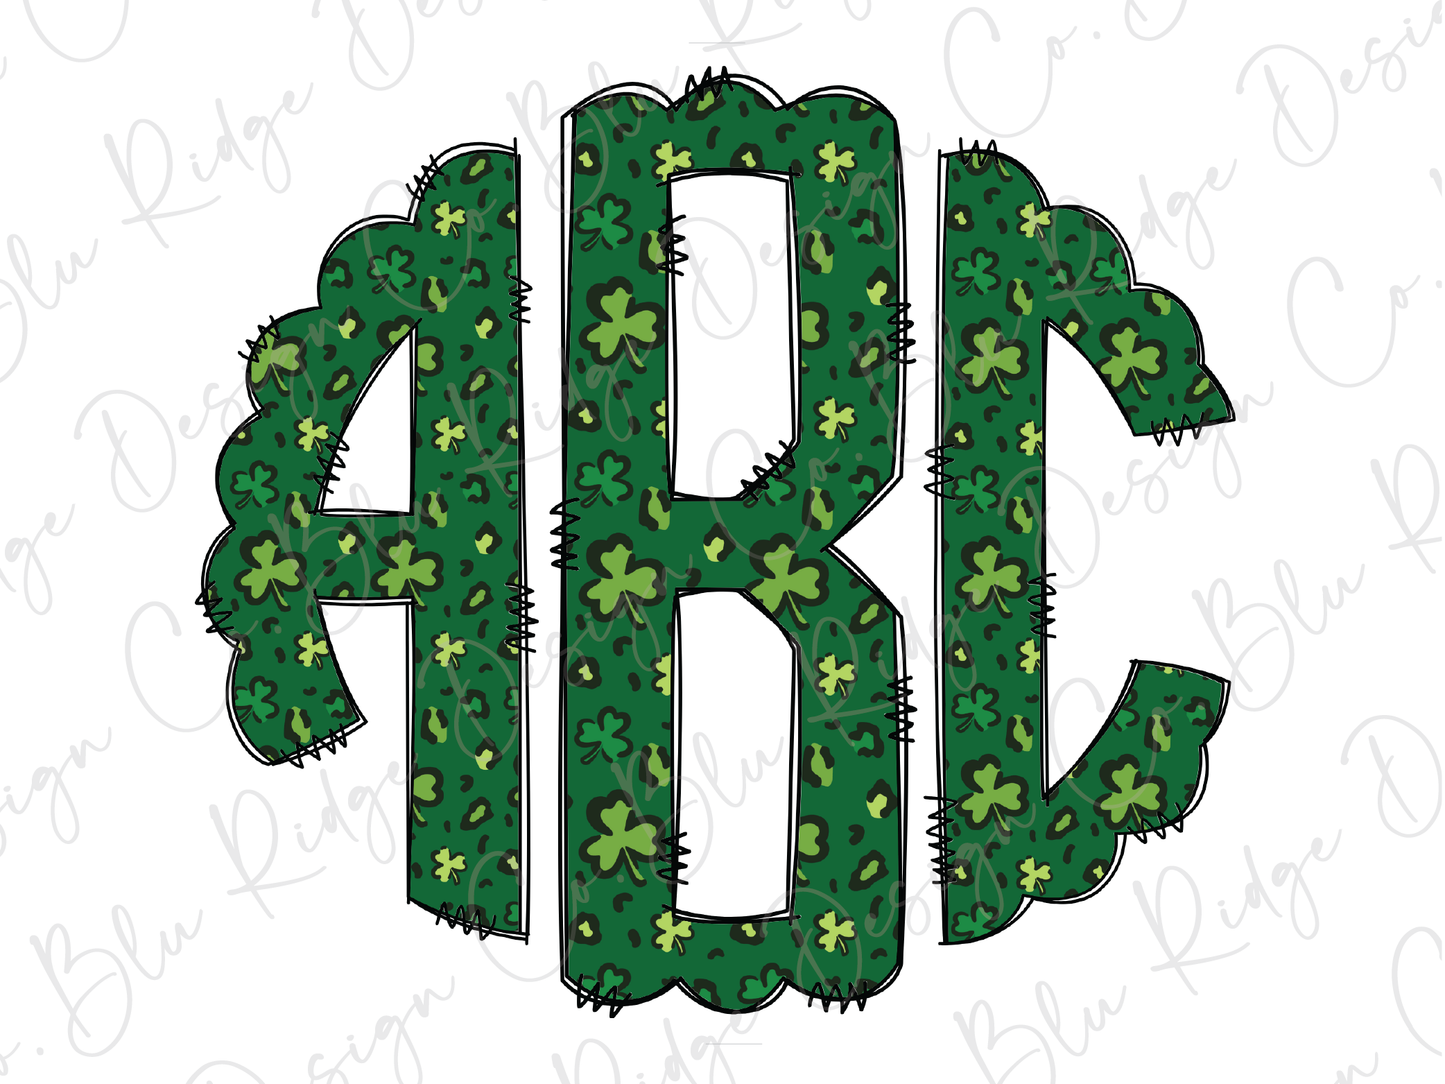 the letter b is made up of shamrock leaves